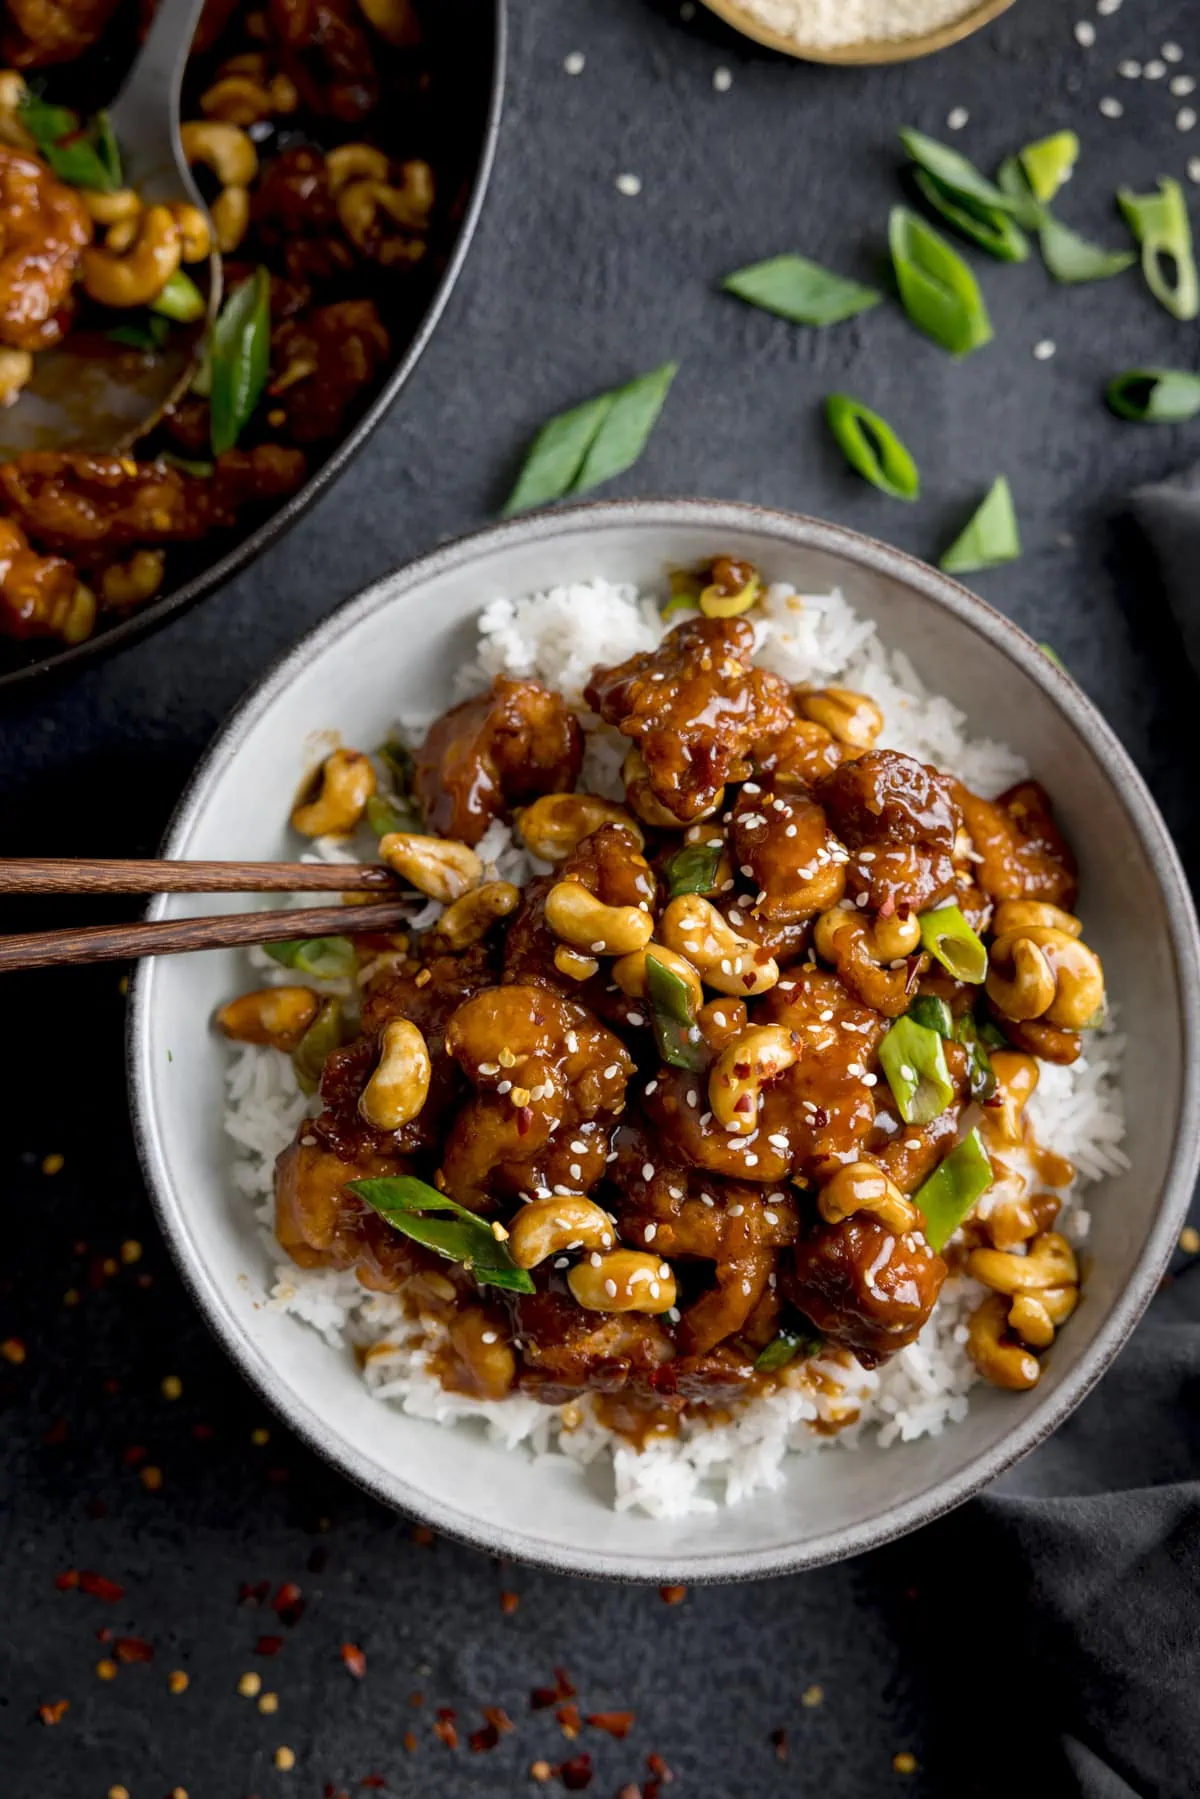 Overhead of sticky cashew chicken with rice in a white bowl on a dark background. There are chopsticks sticking out of the bowl. The pan of cashew chicken is in shot and there are chopped spring onions sprinkled around.